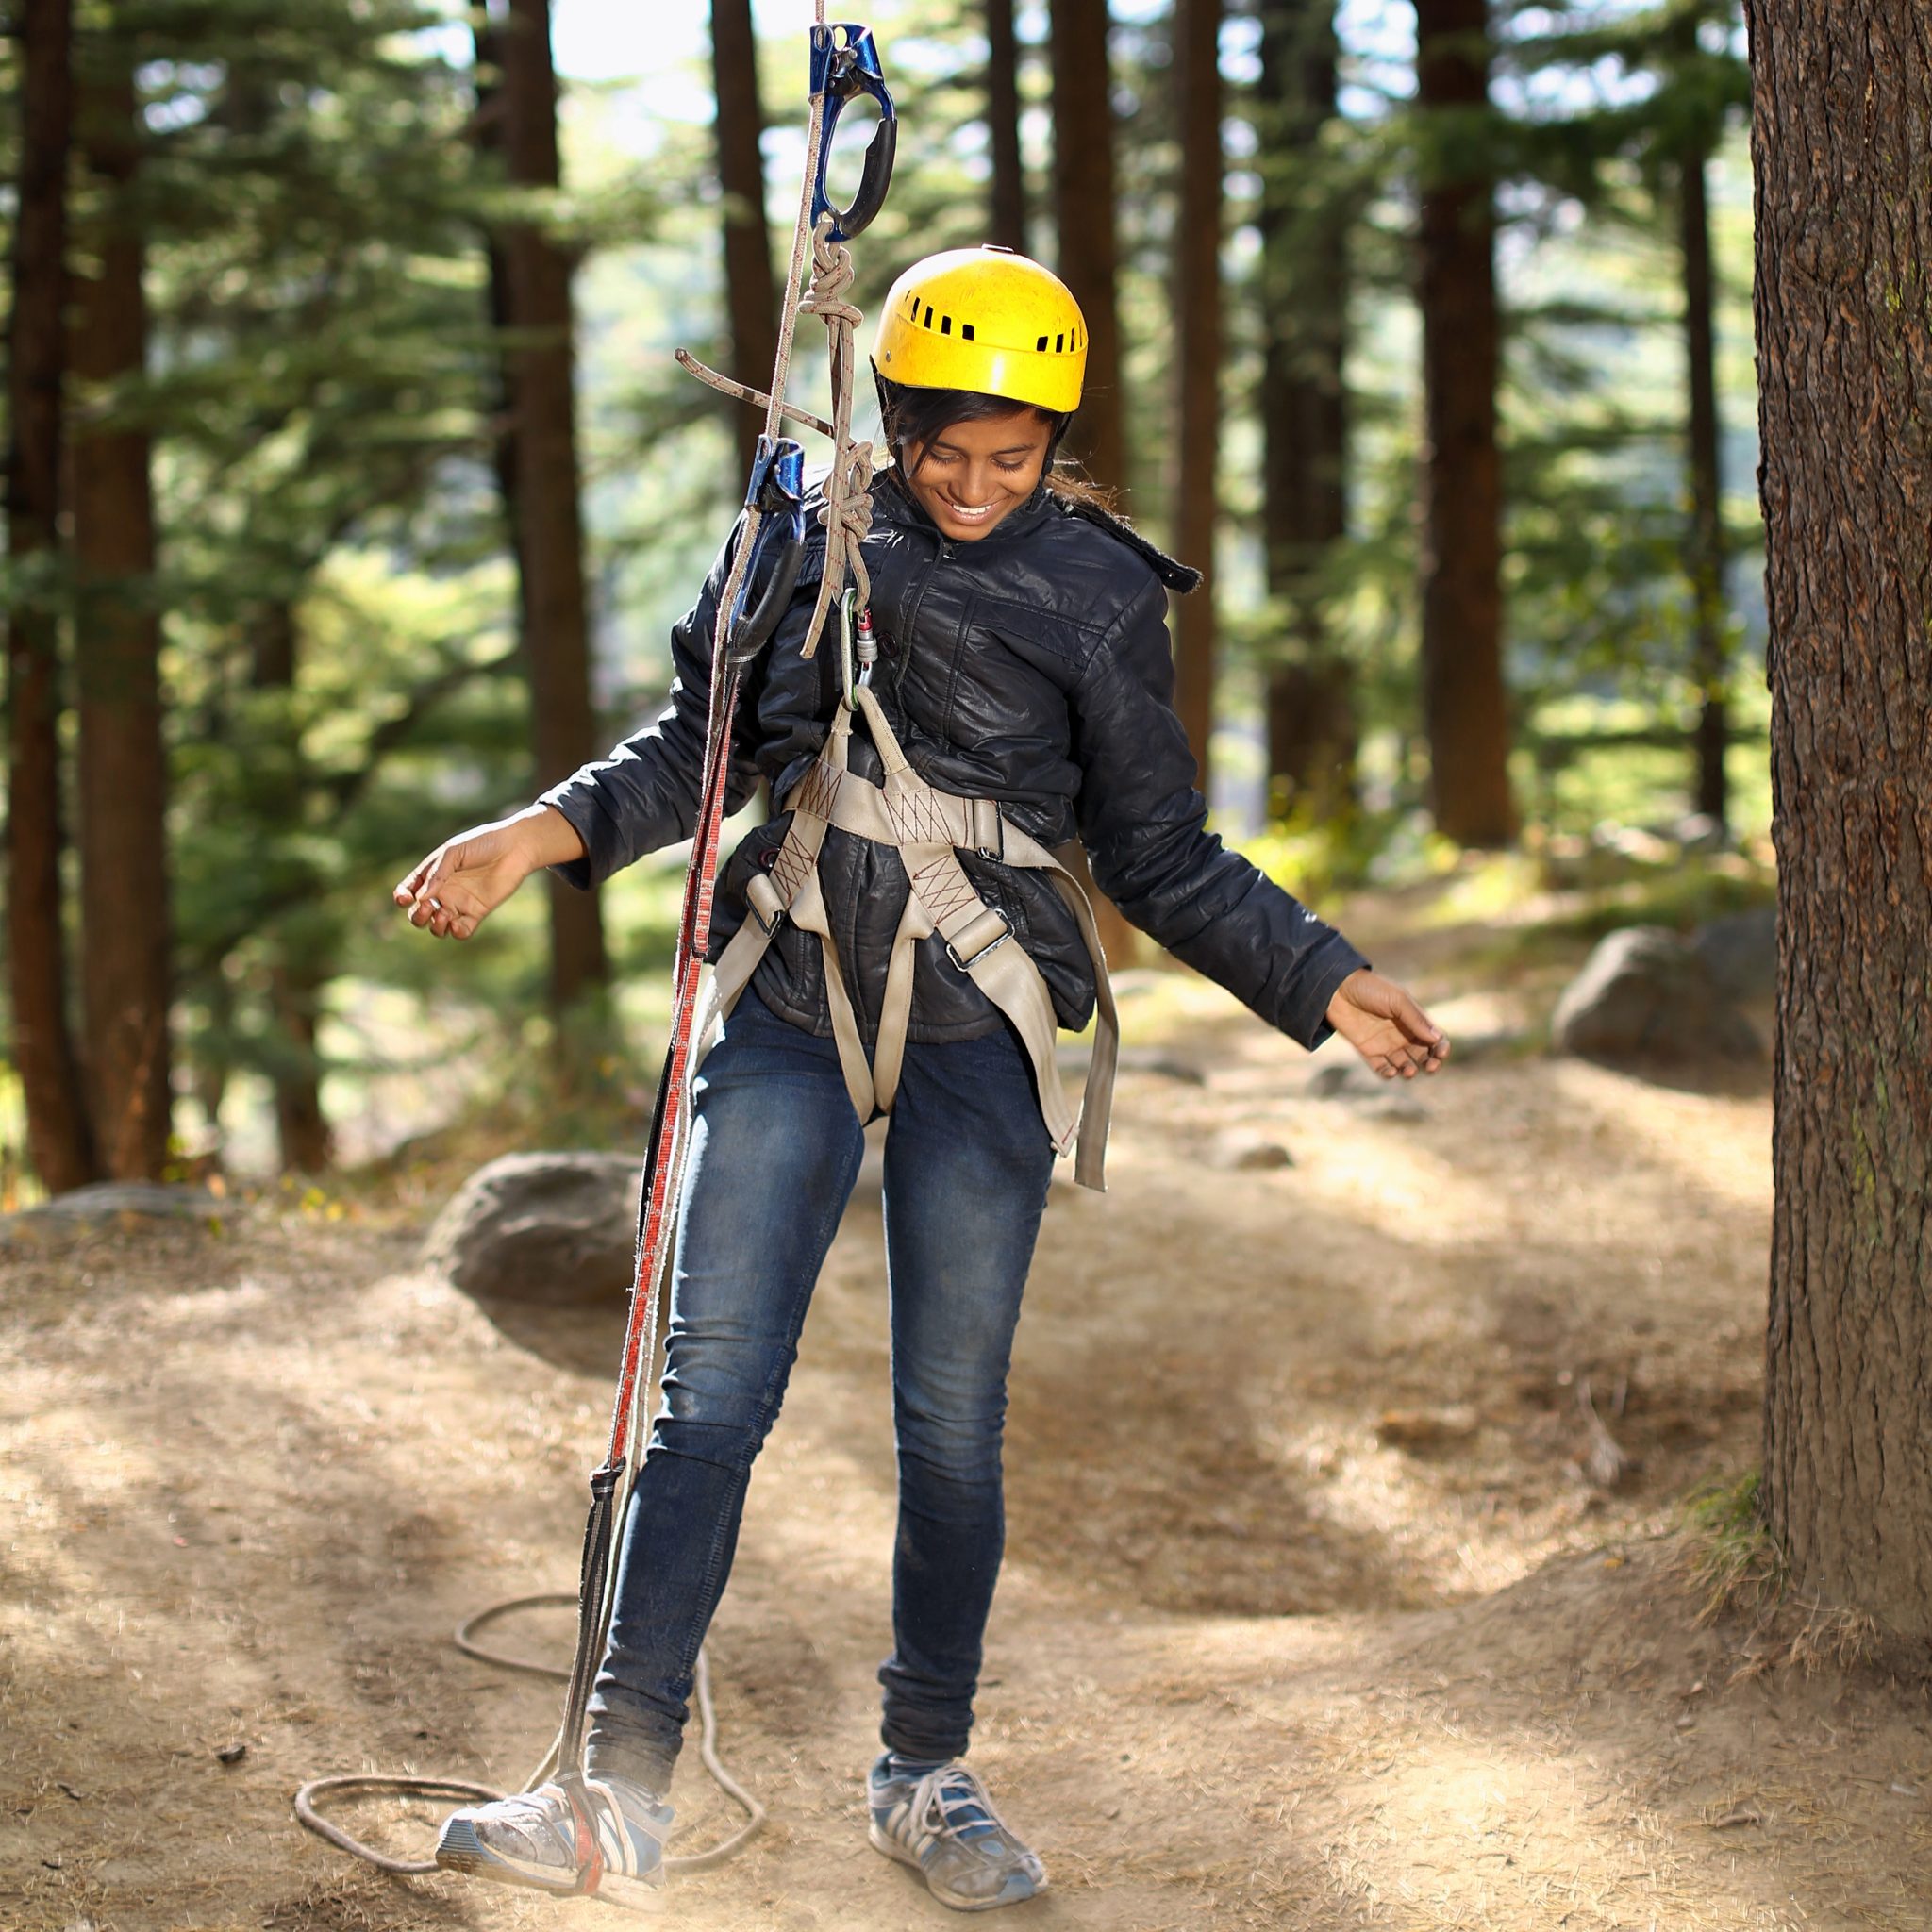 General Fun Facts About Ziplining